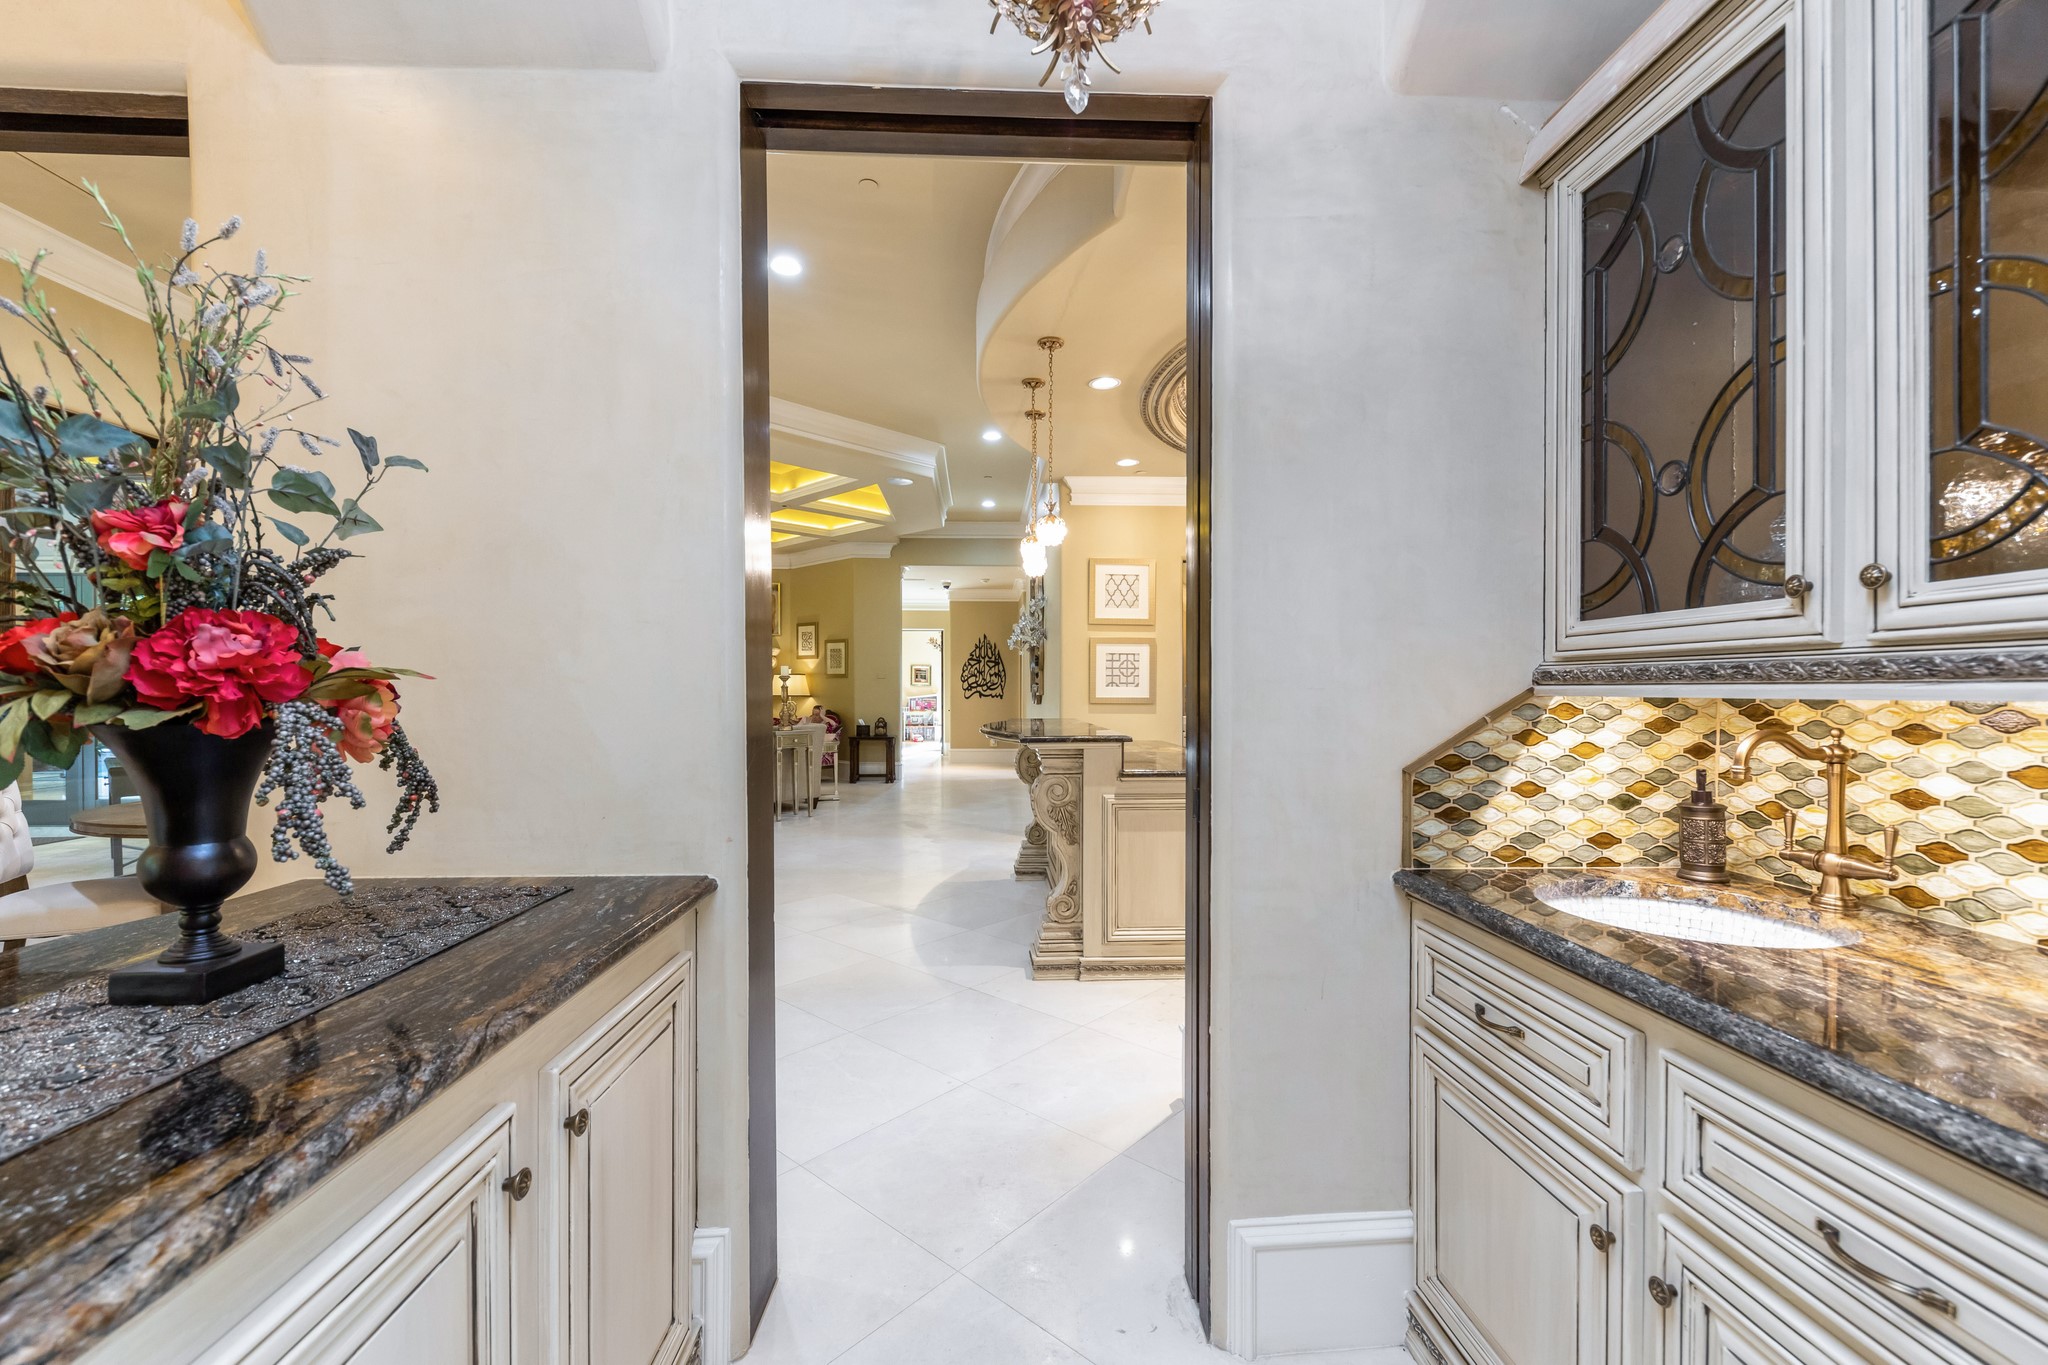 Connecting the formal dinning to the kitchen, you will find a wet bar with tons of storage and custom lighting.